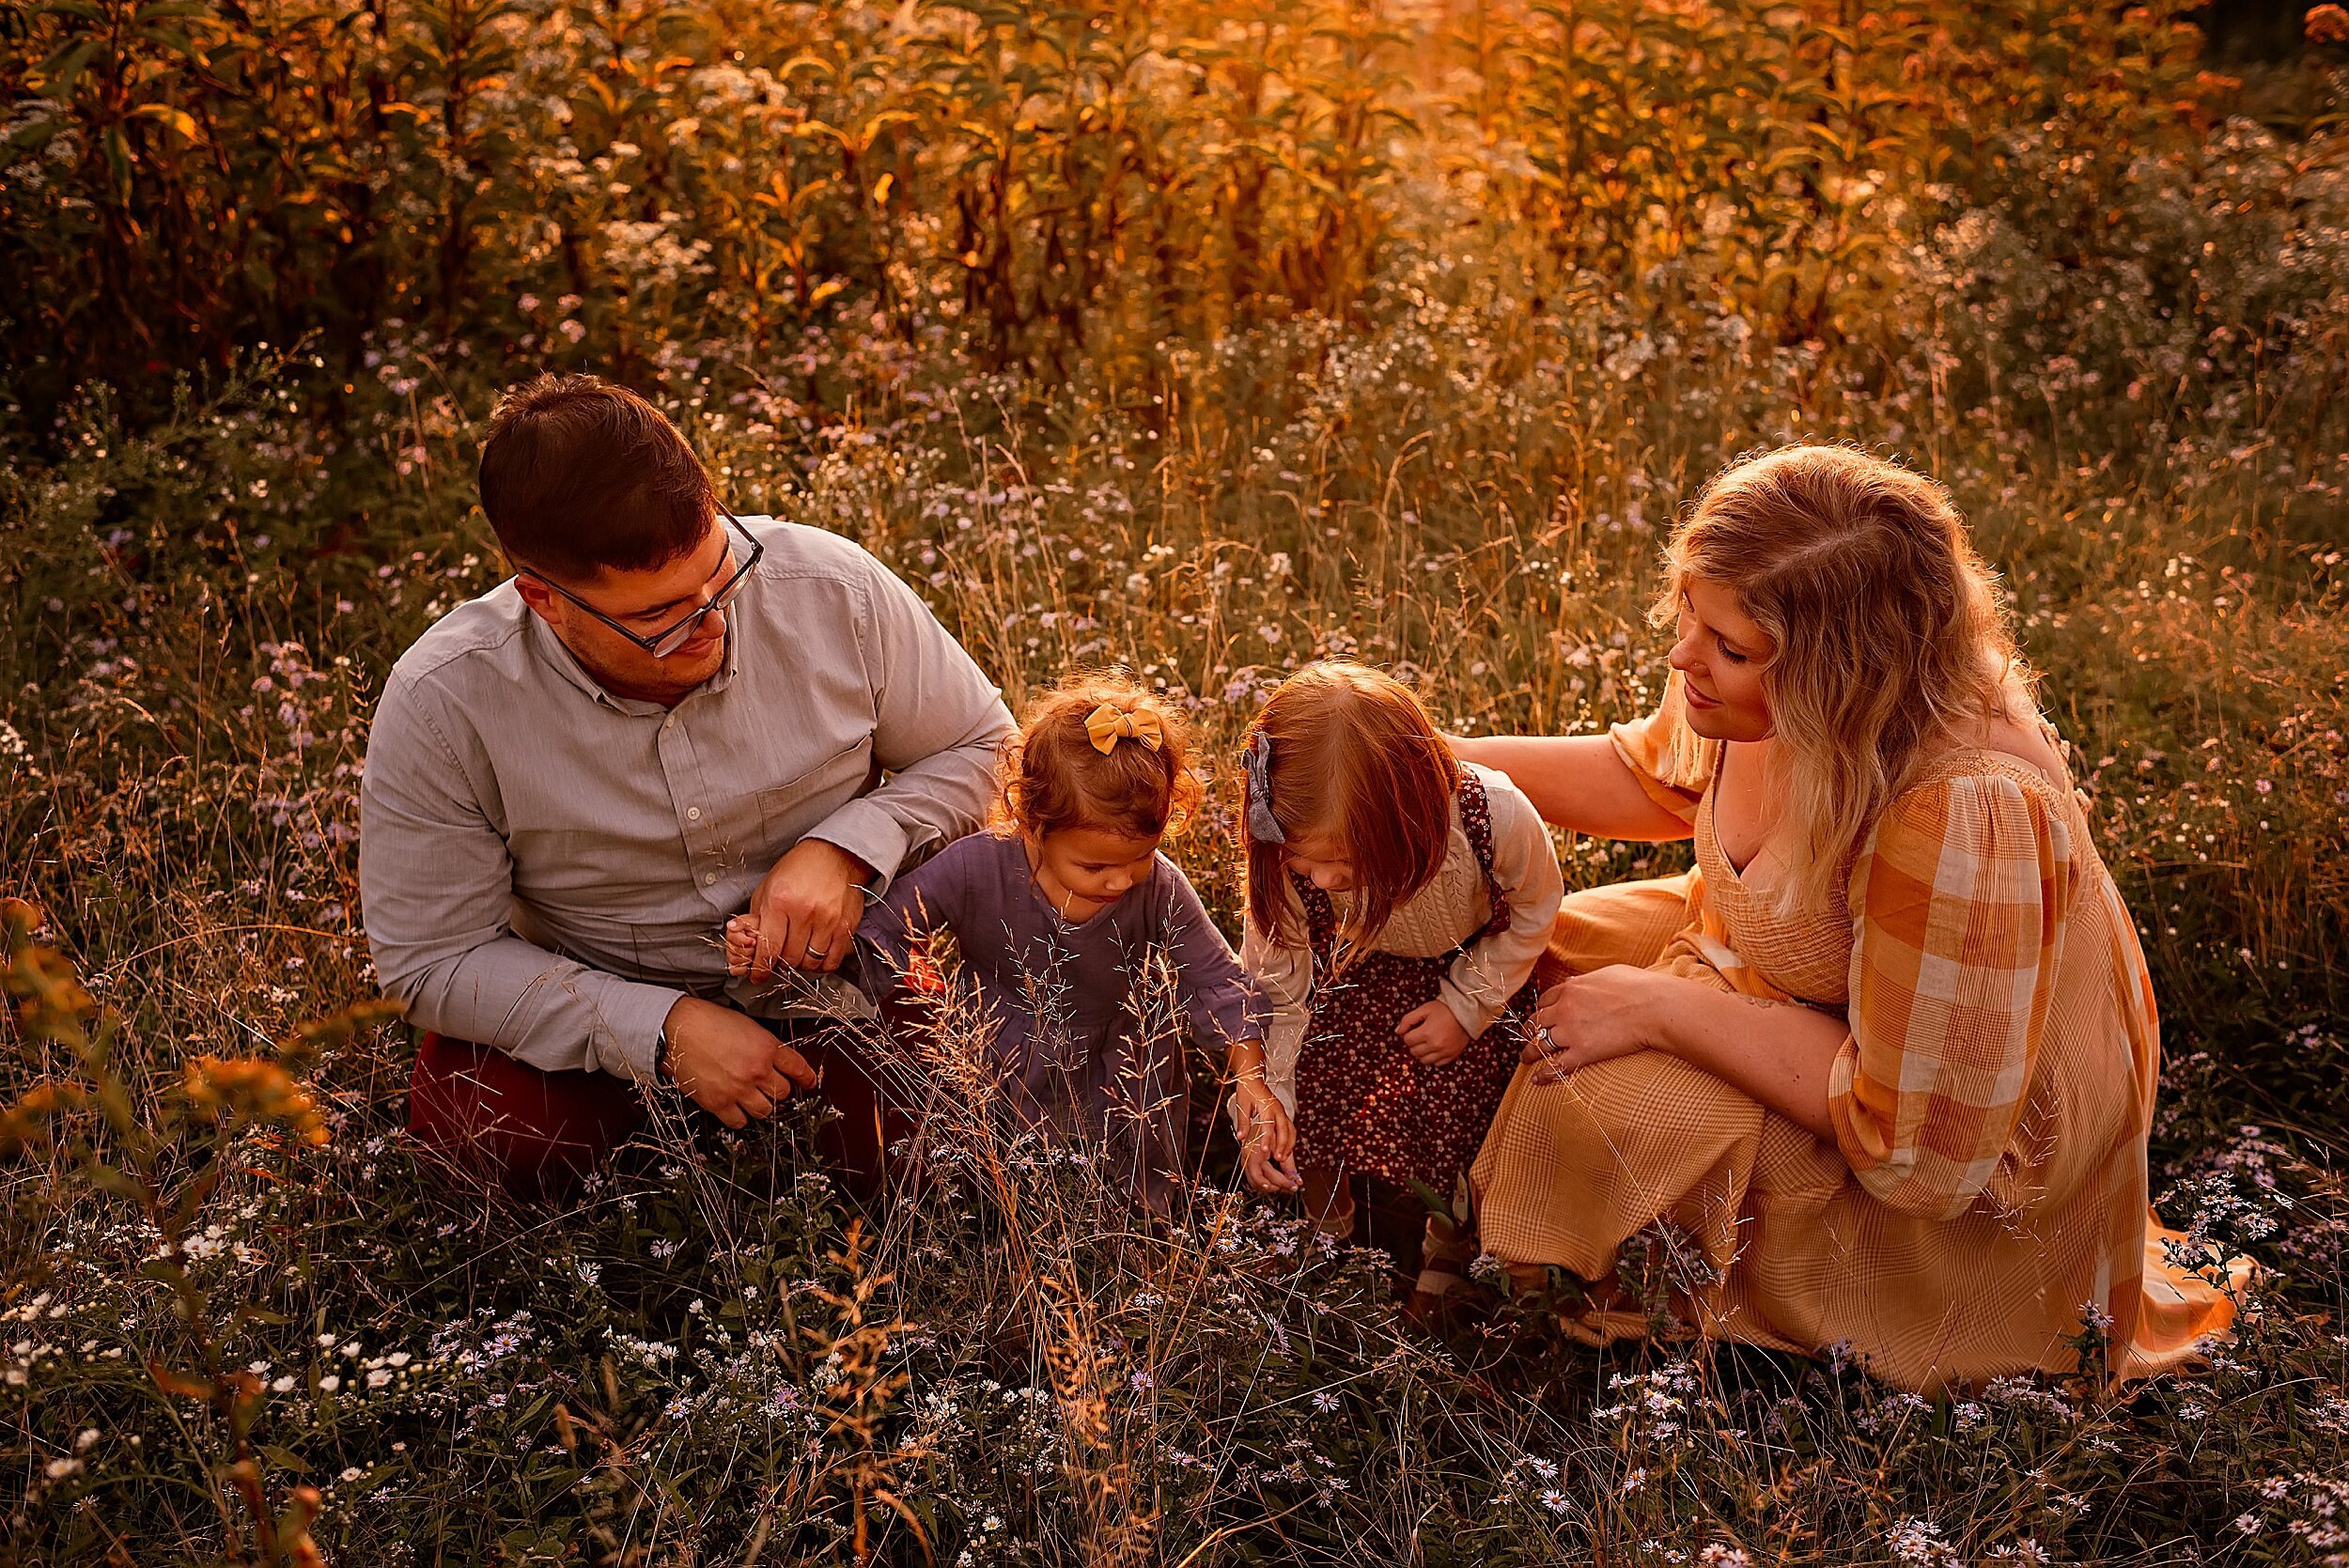 akron-ohio-family-photography-session-summer-sunset-outdoors-with-photographer-lauren-grayson_0298.jpeg